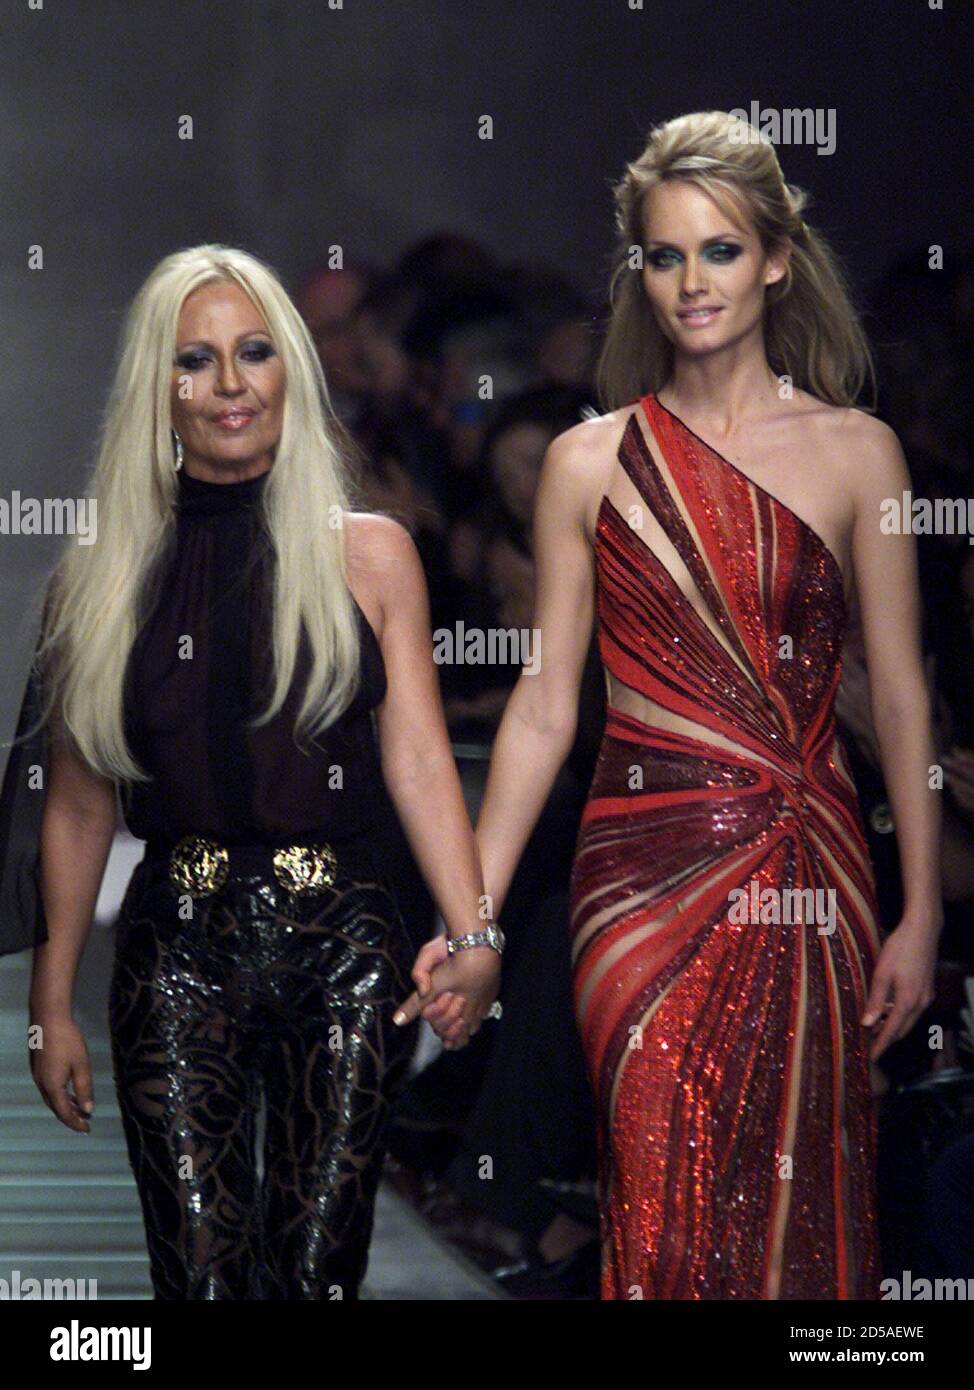 Italian designer Donatella Versace acknowledges the applause on the catwalk  with a model at the end of Gianni Versace's Autumn/Winter 2000/2001  ready-to-wear women's collection in Milan, February 25. The Milan fashion  show